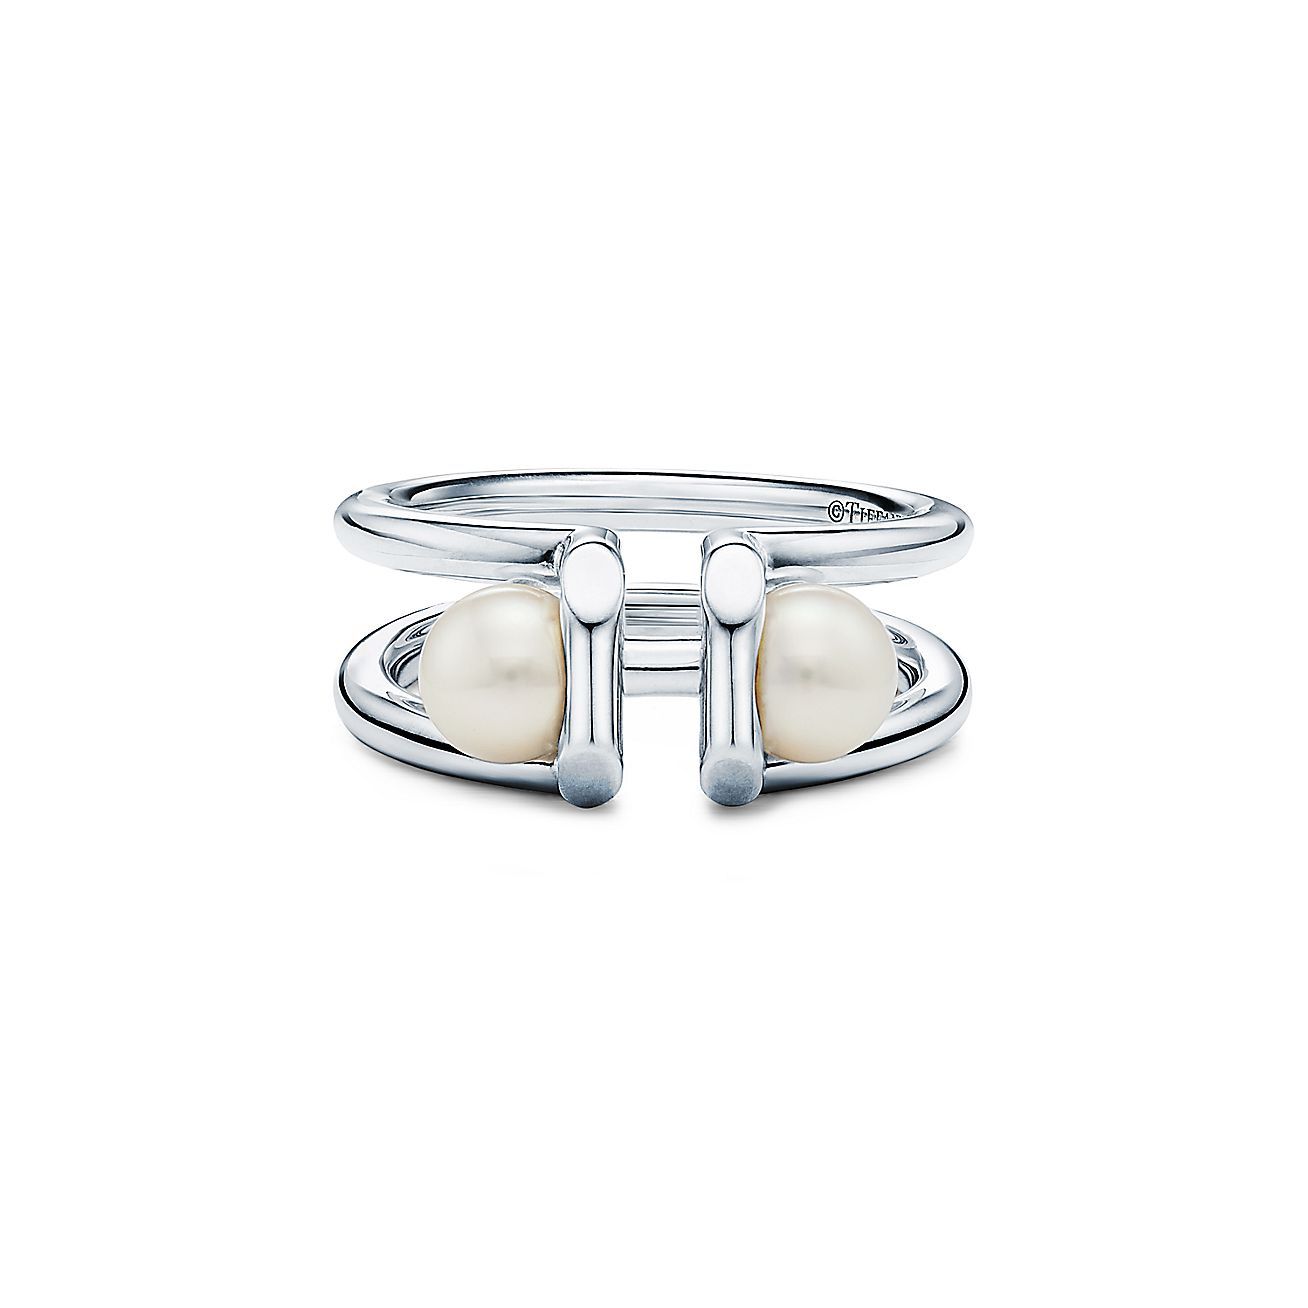 Tiffany & Co Double Pearl Ring in Sterling Silver